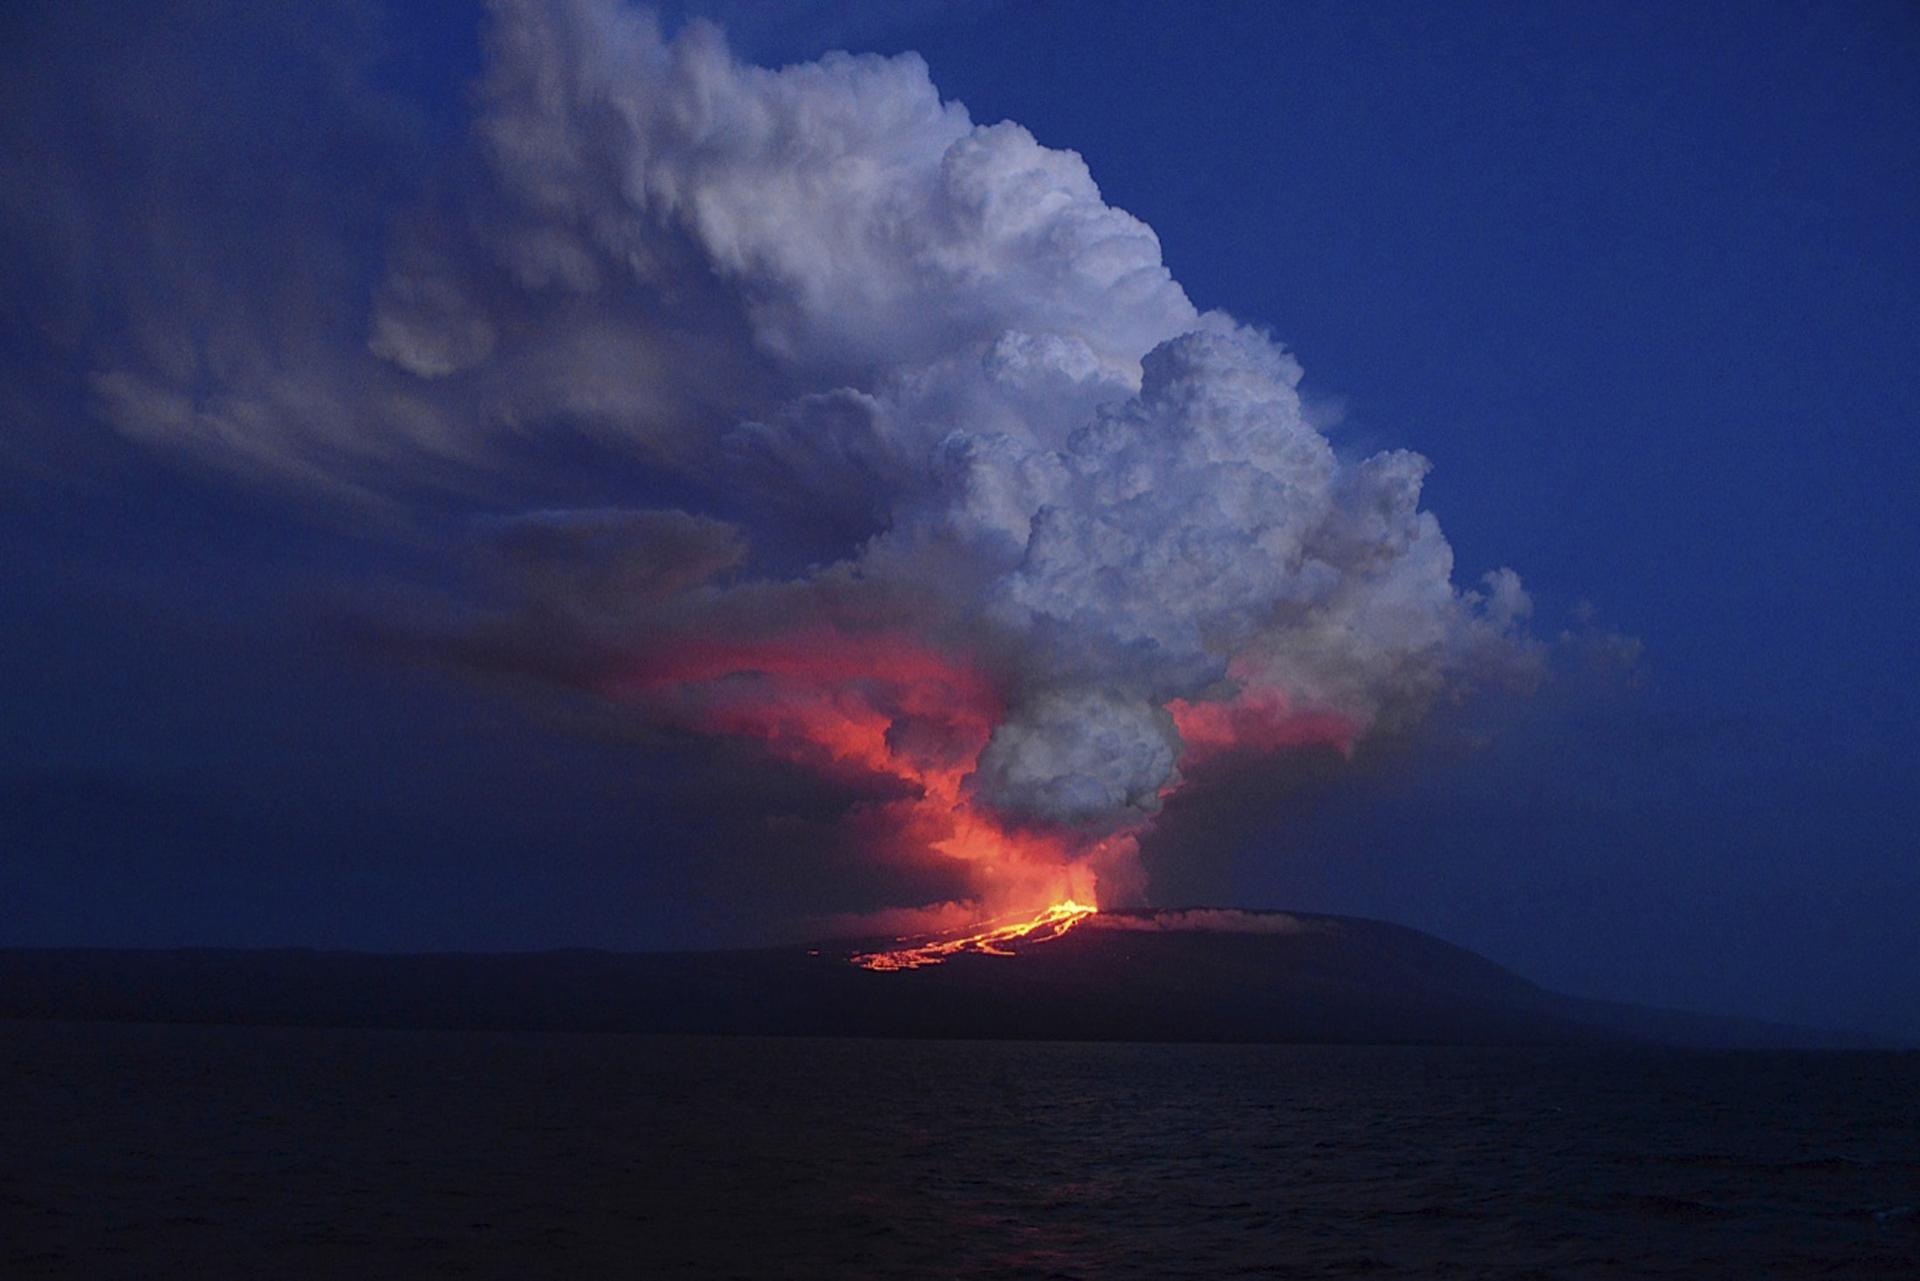 The Wolf volcano perched atop one of Ecuador's Galapagos Islands erupted in the early hours of Monday. The roughly 1.1-mile high Wolf volcano is located on Isabela Island, home to a rich variety of flora and fauna typical of the archipelago that helped in